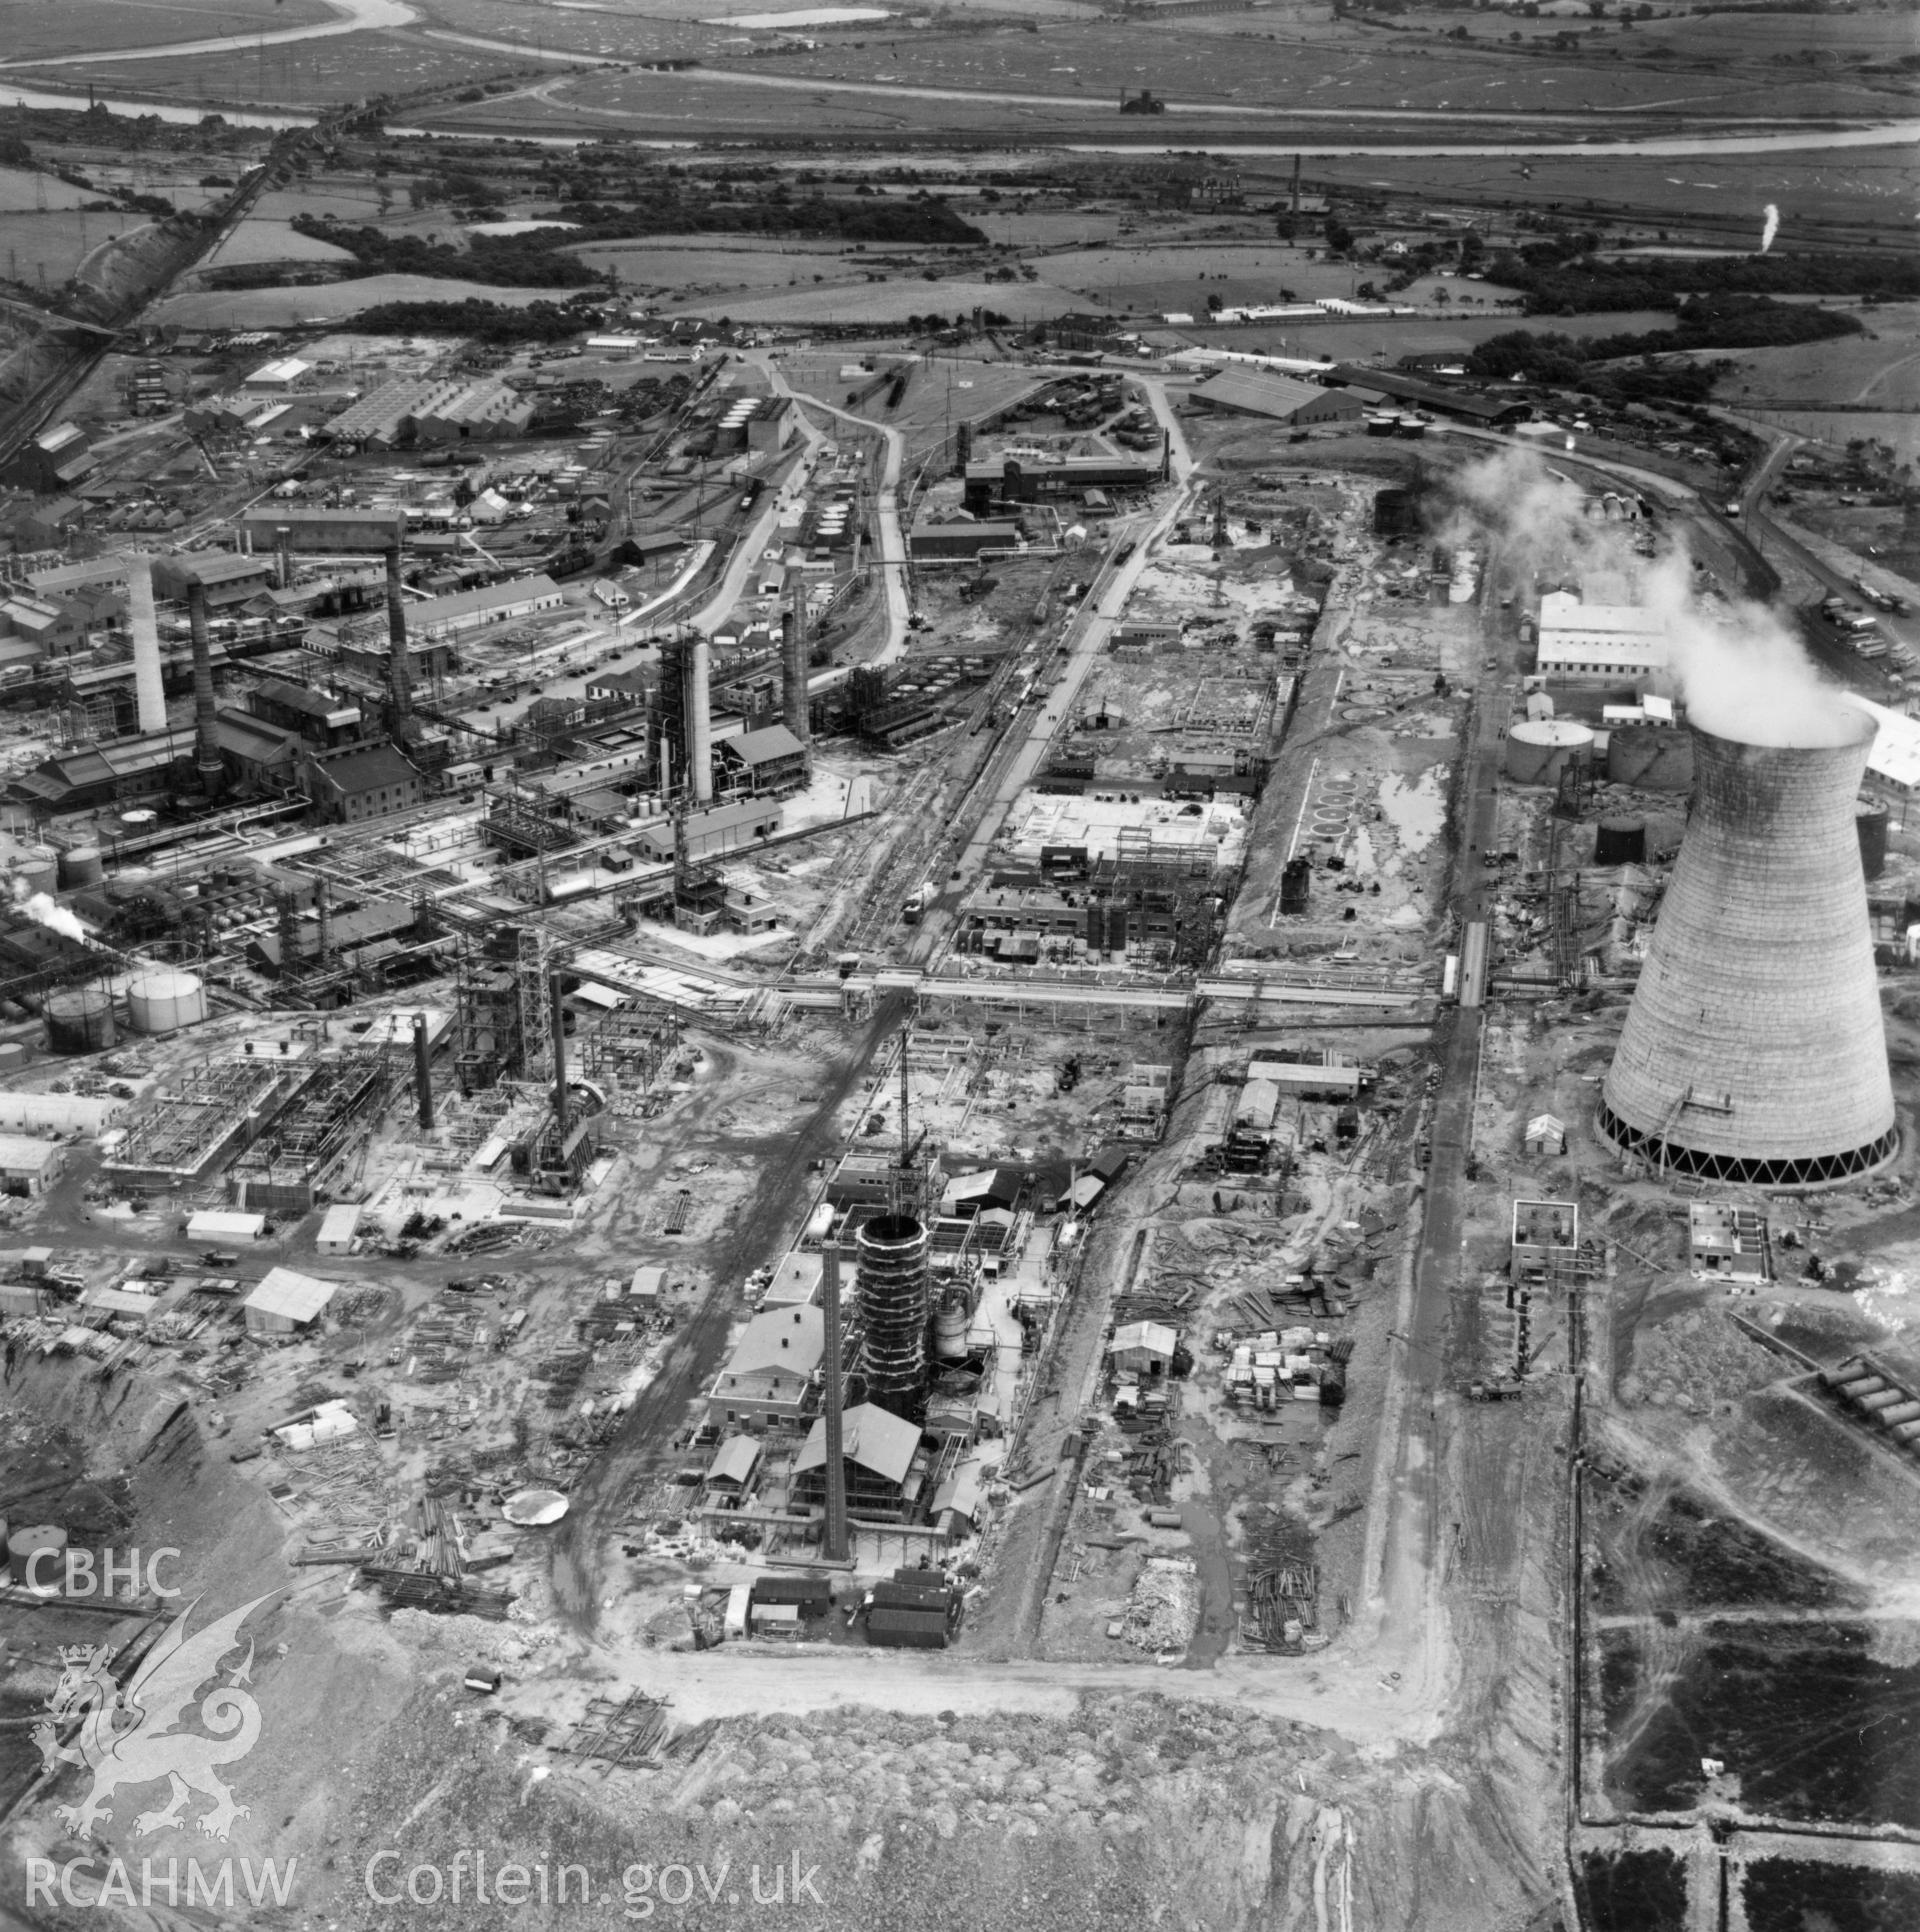 General view of the National Oil Refinery, Llandarcy. Oblique aerial photograph, 5?" cut roll film.